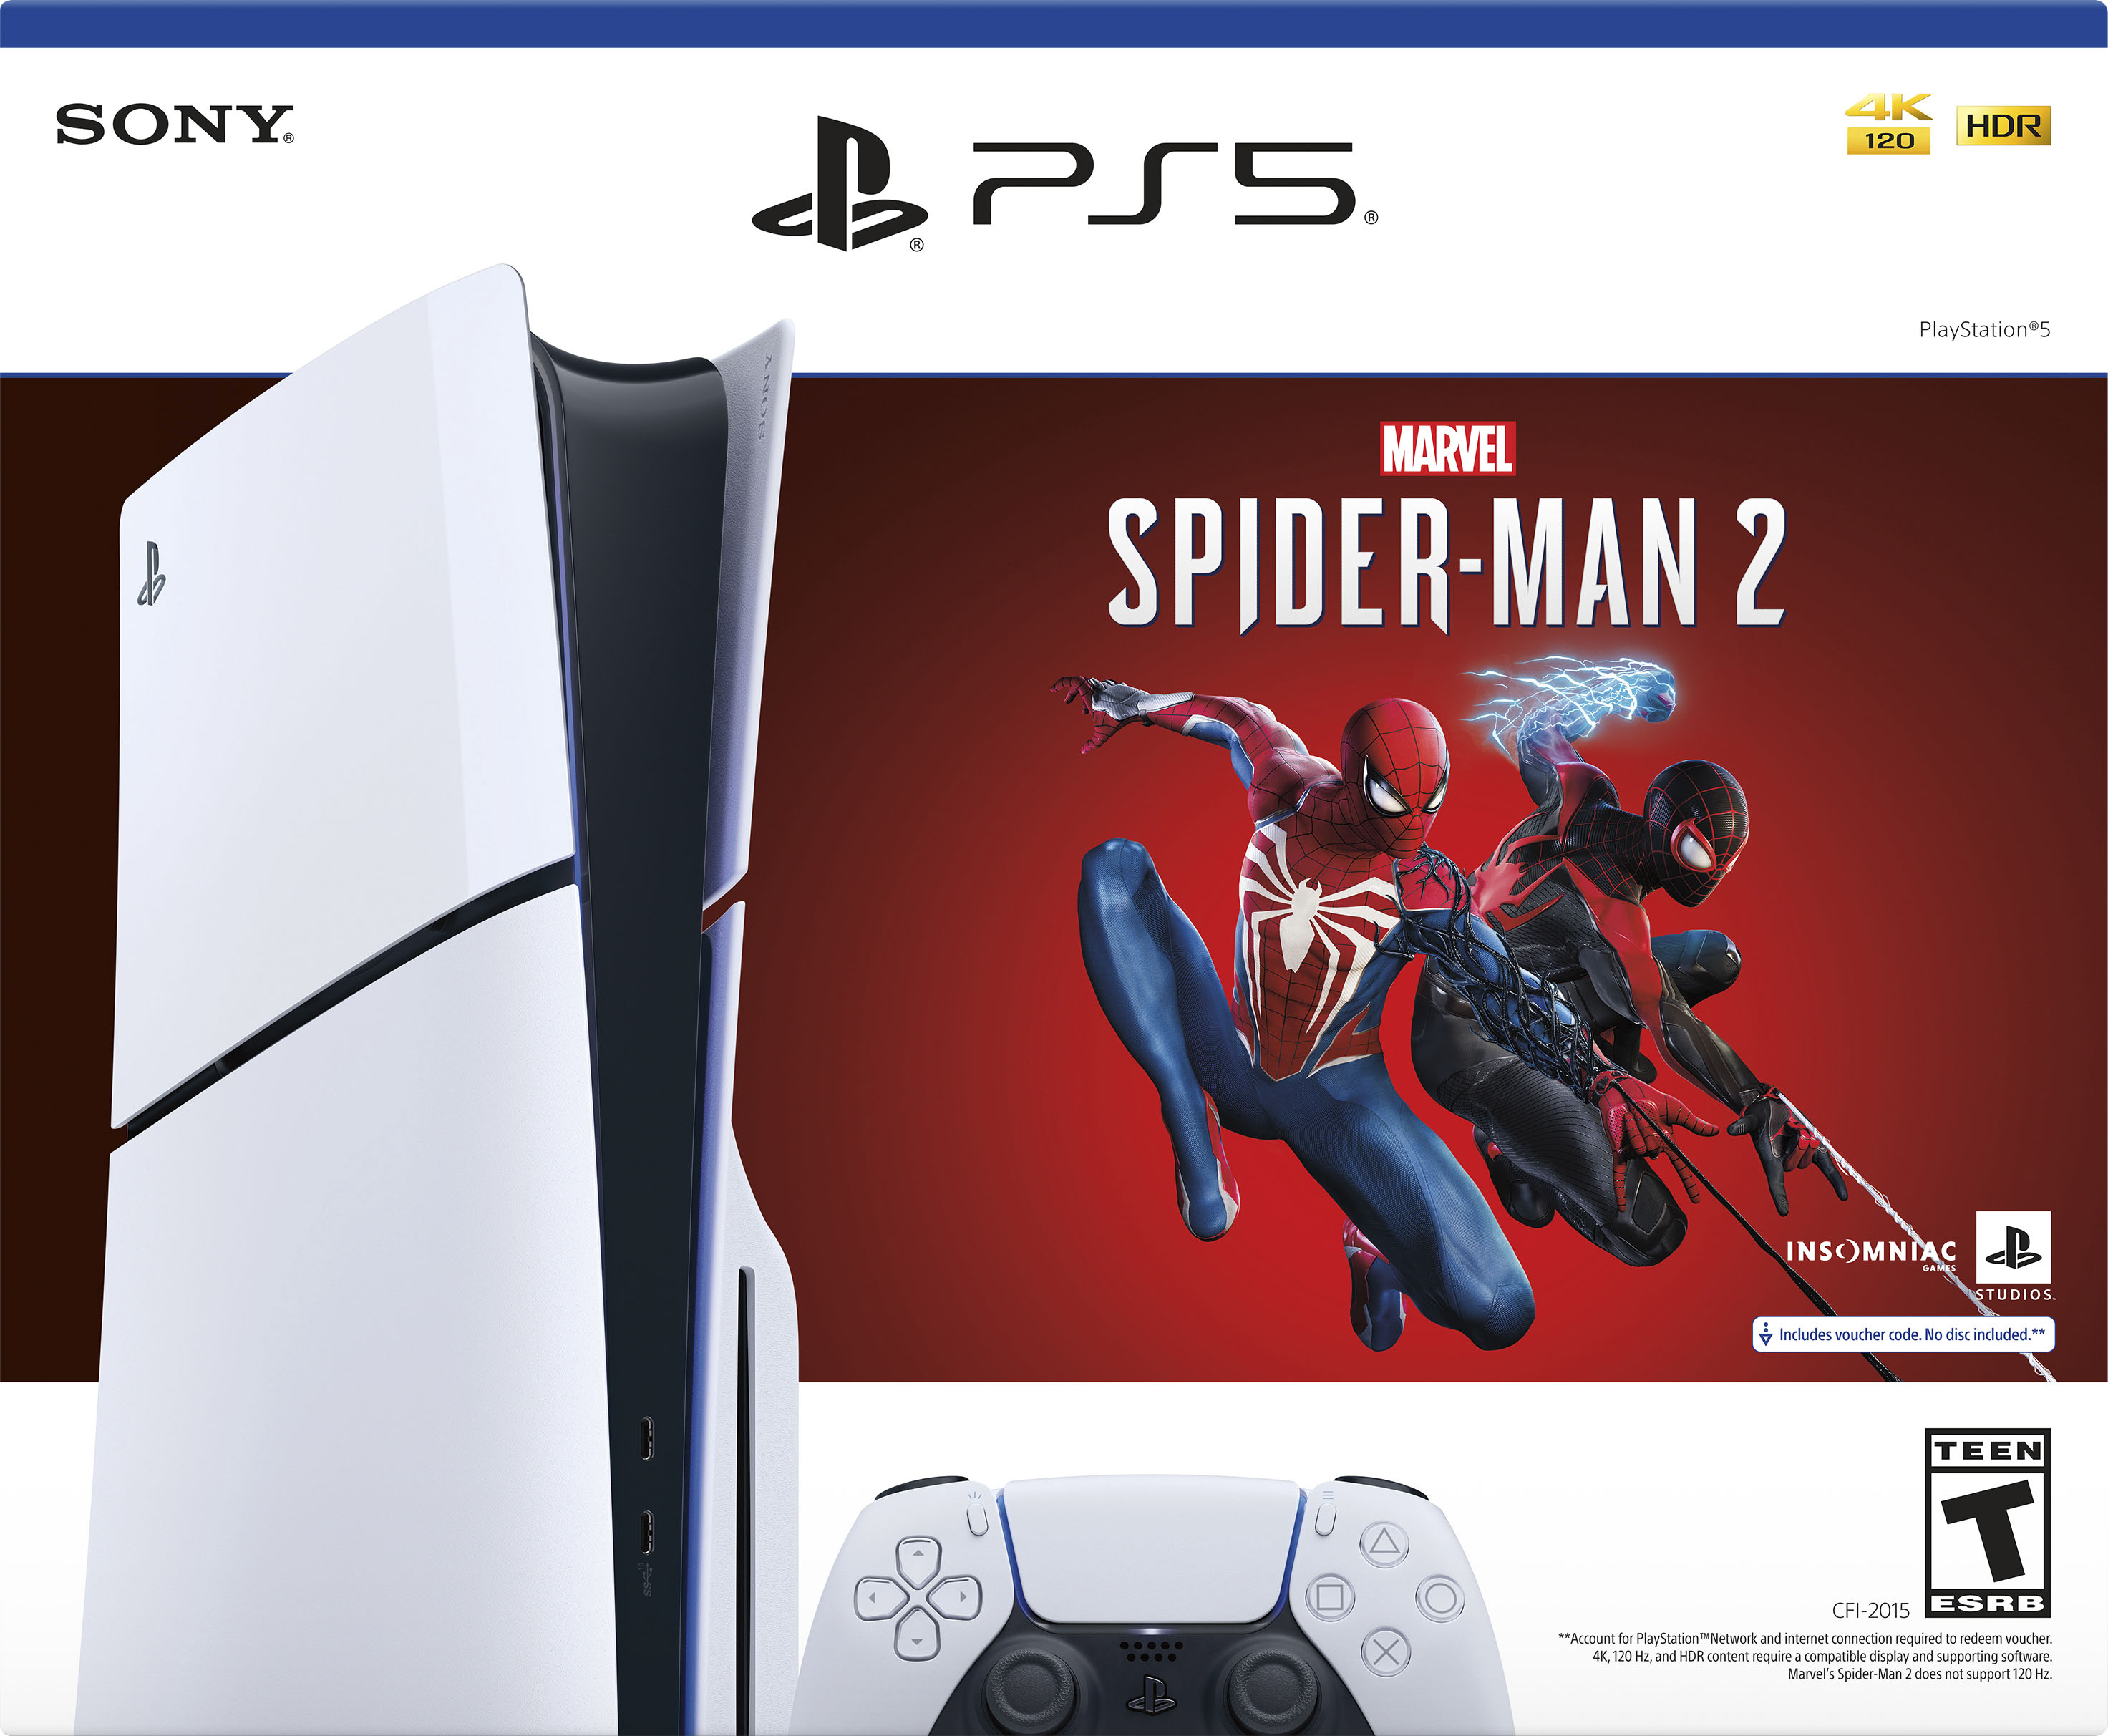 Marvel's Spider-Man free download available now, no PS Plus needed